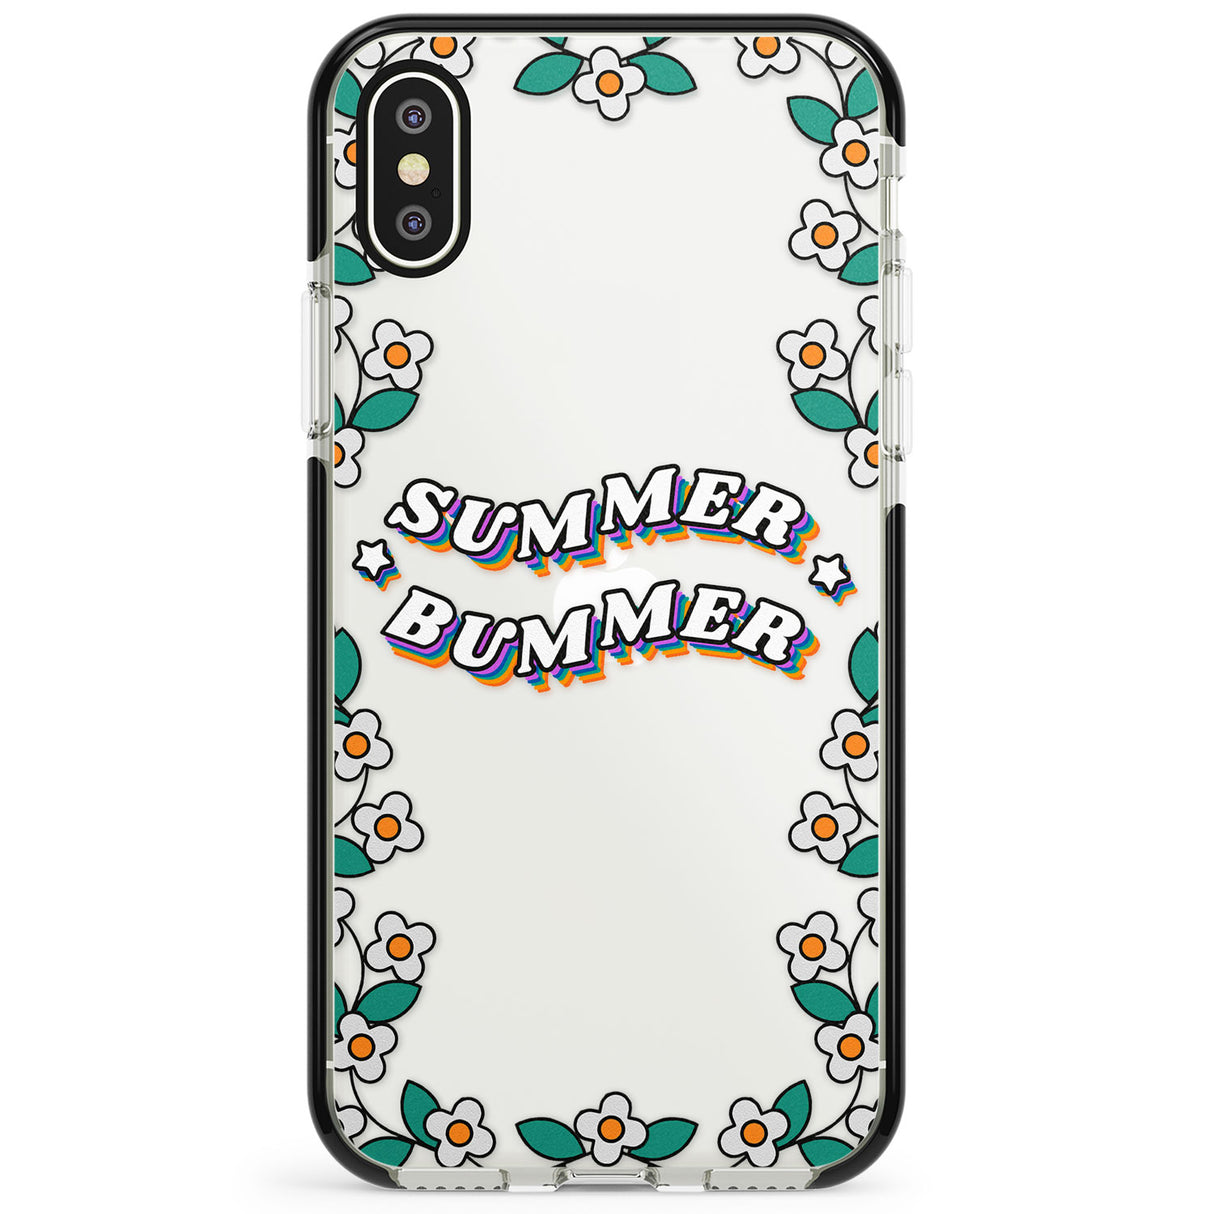 Summer Bummer Phone Case for iPhone X XS Max XR